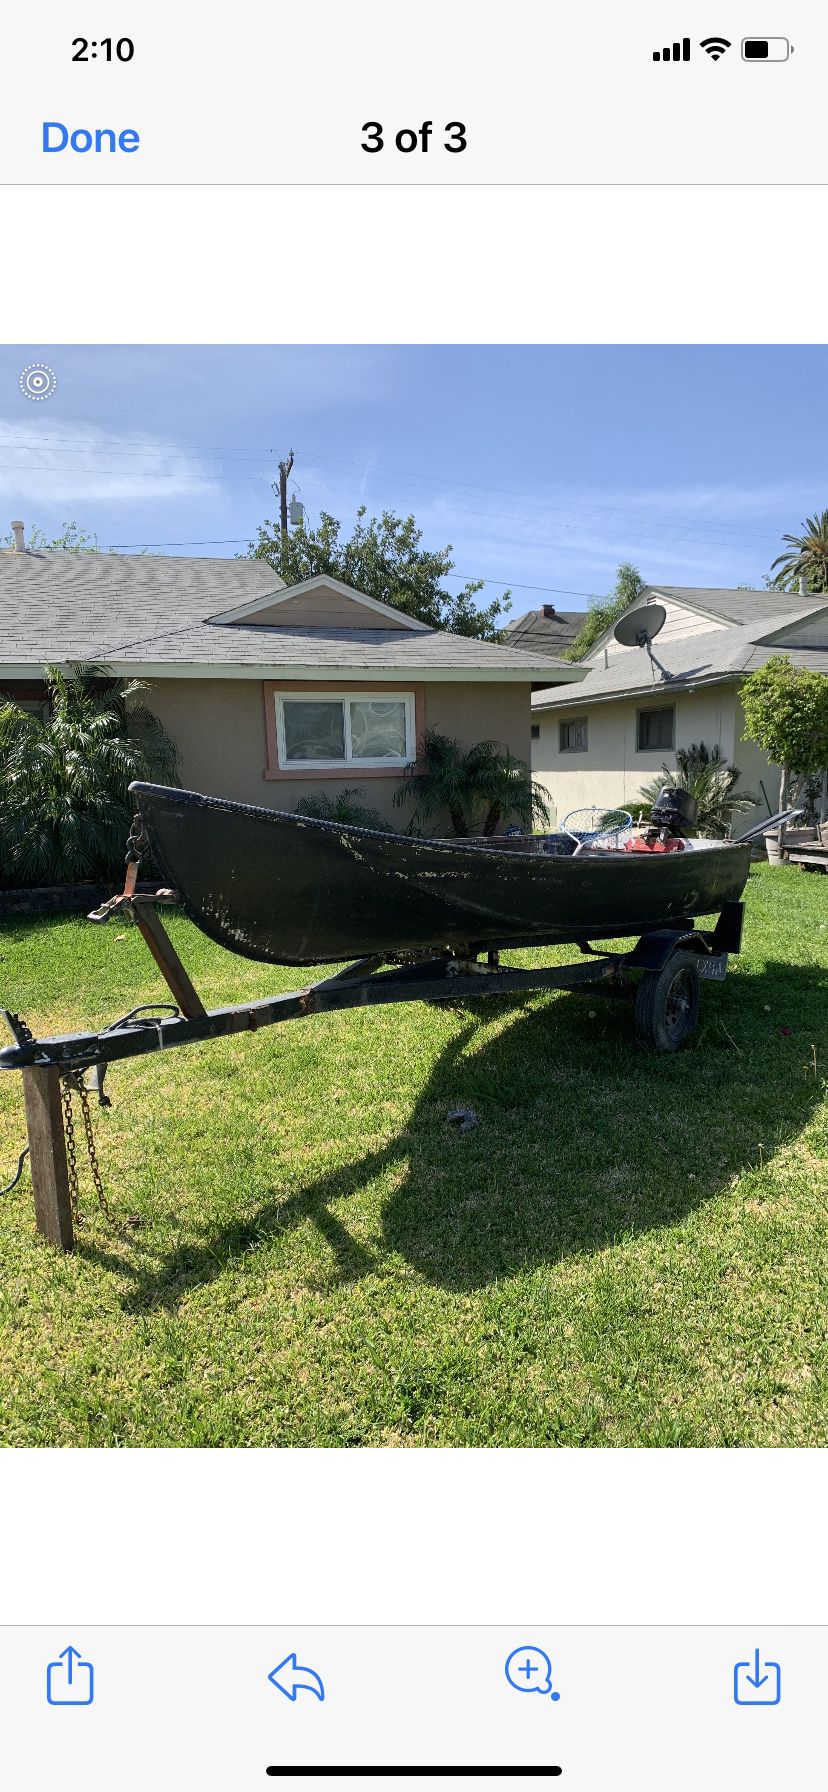 13 Ft Aluminum  Boat With Trailer And Moyer